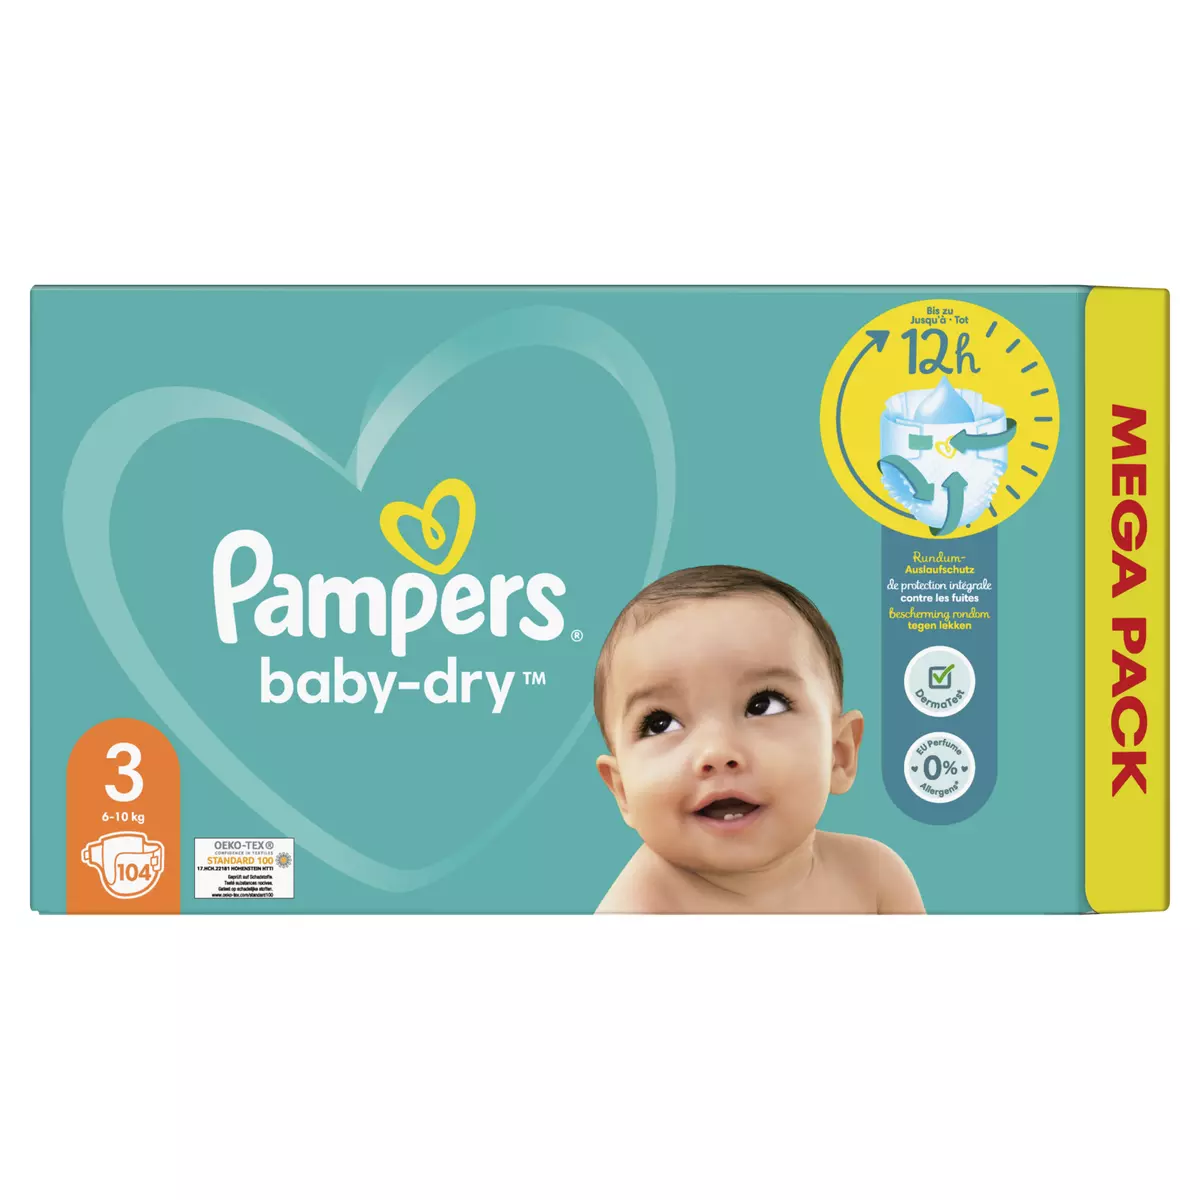 Pampers - Bébé Dry Pants - Taille 8 - Mega Pack - 36 couches-culottes